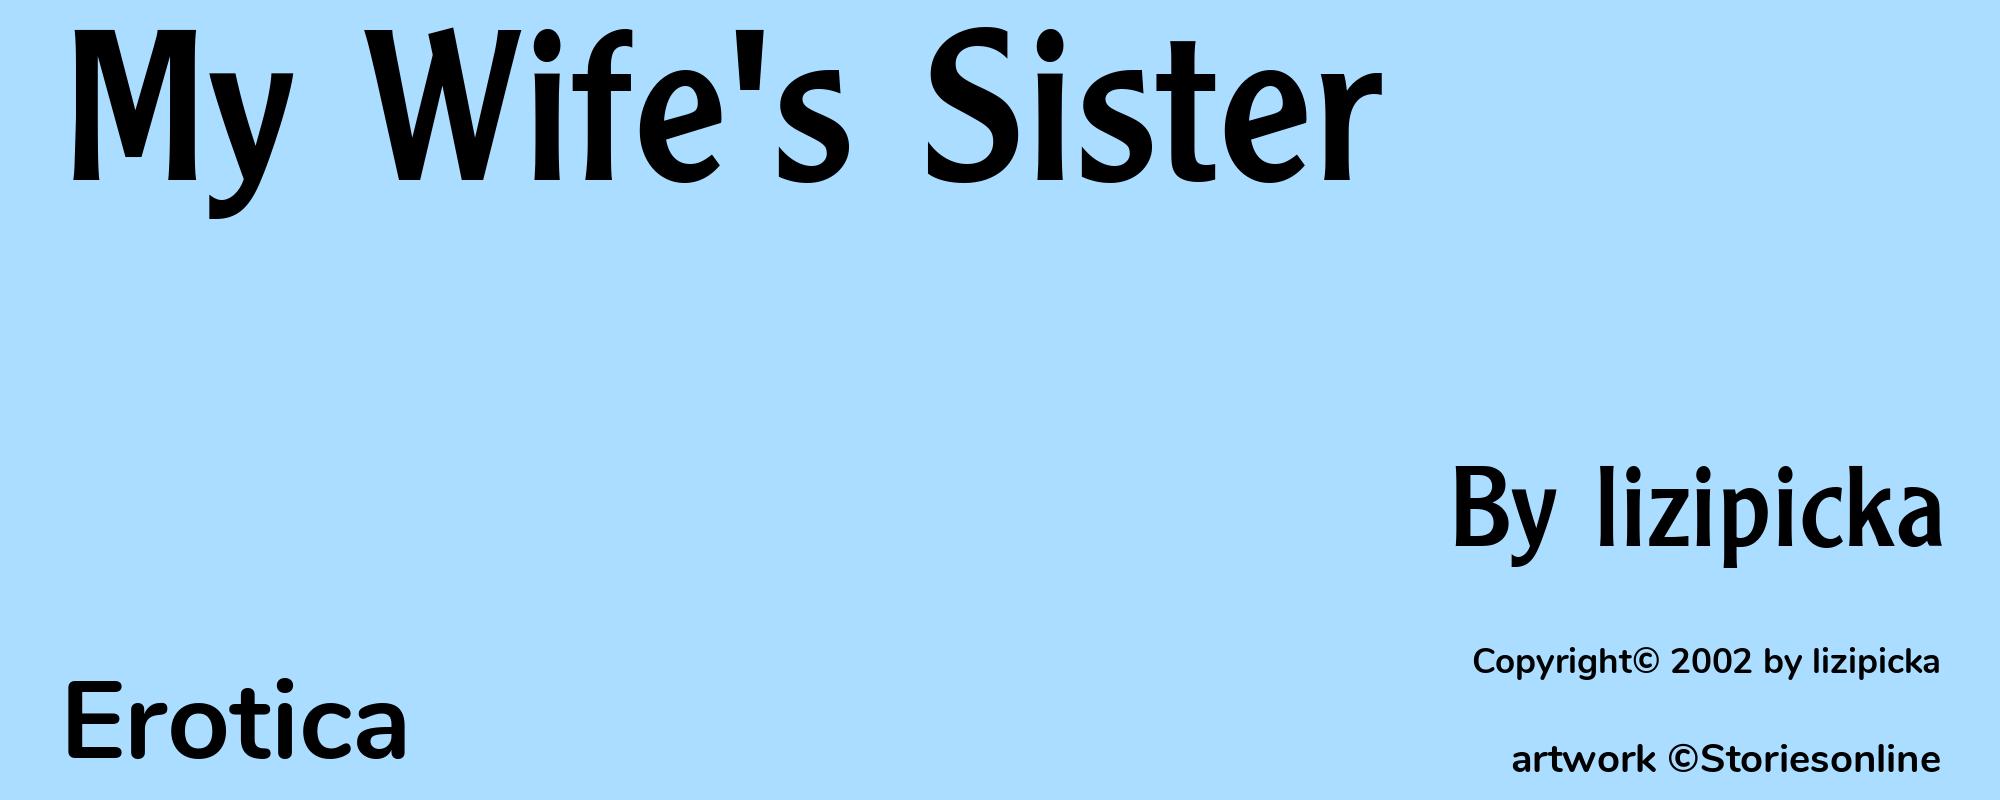 My Wife's Sister - Cover